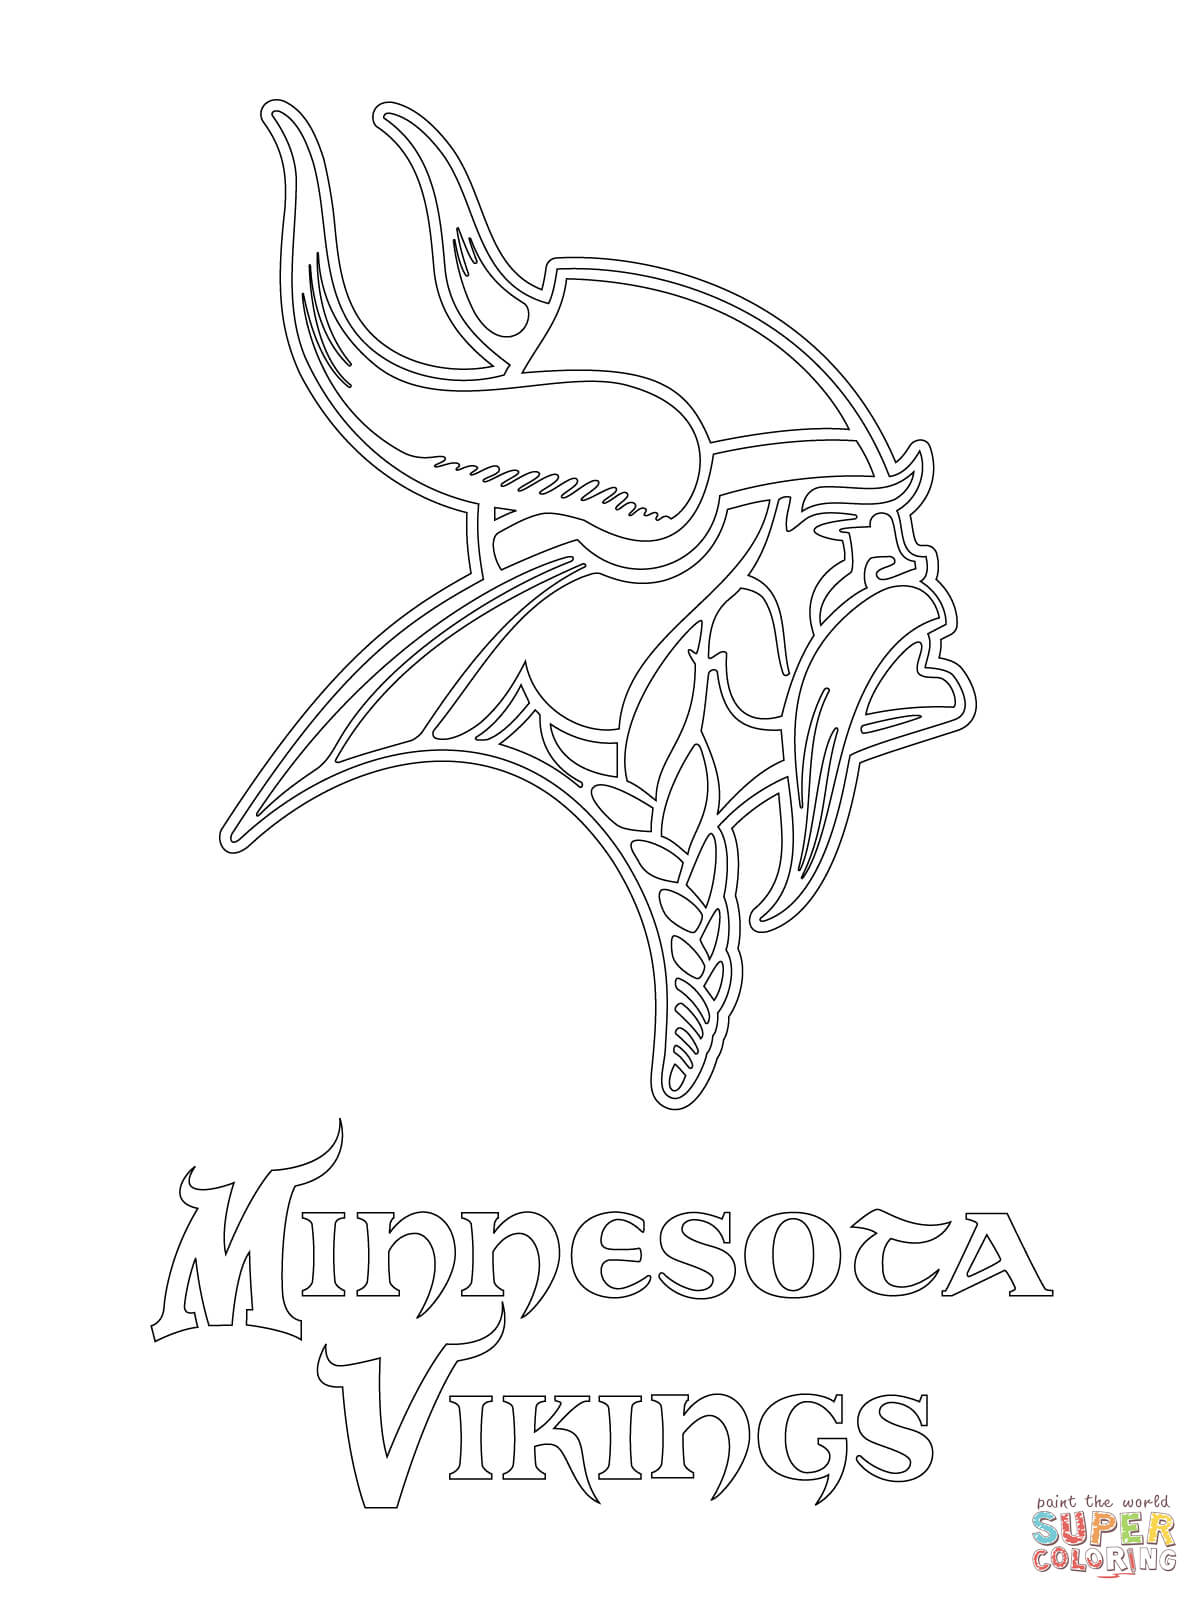 Minnesota Vikings Logo coloring page | Free Printable Coloring Pages